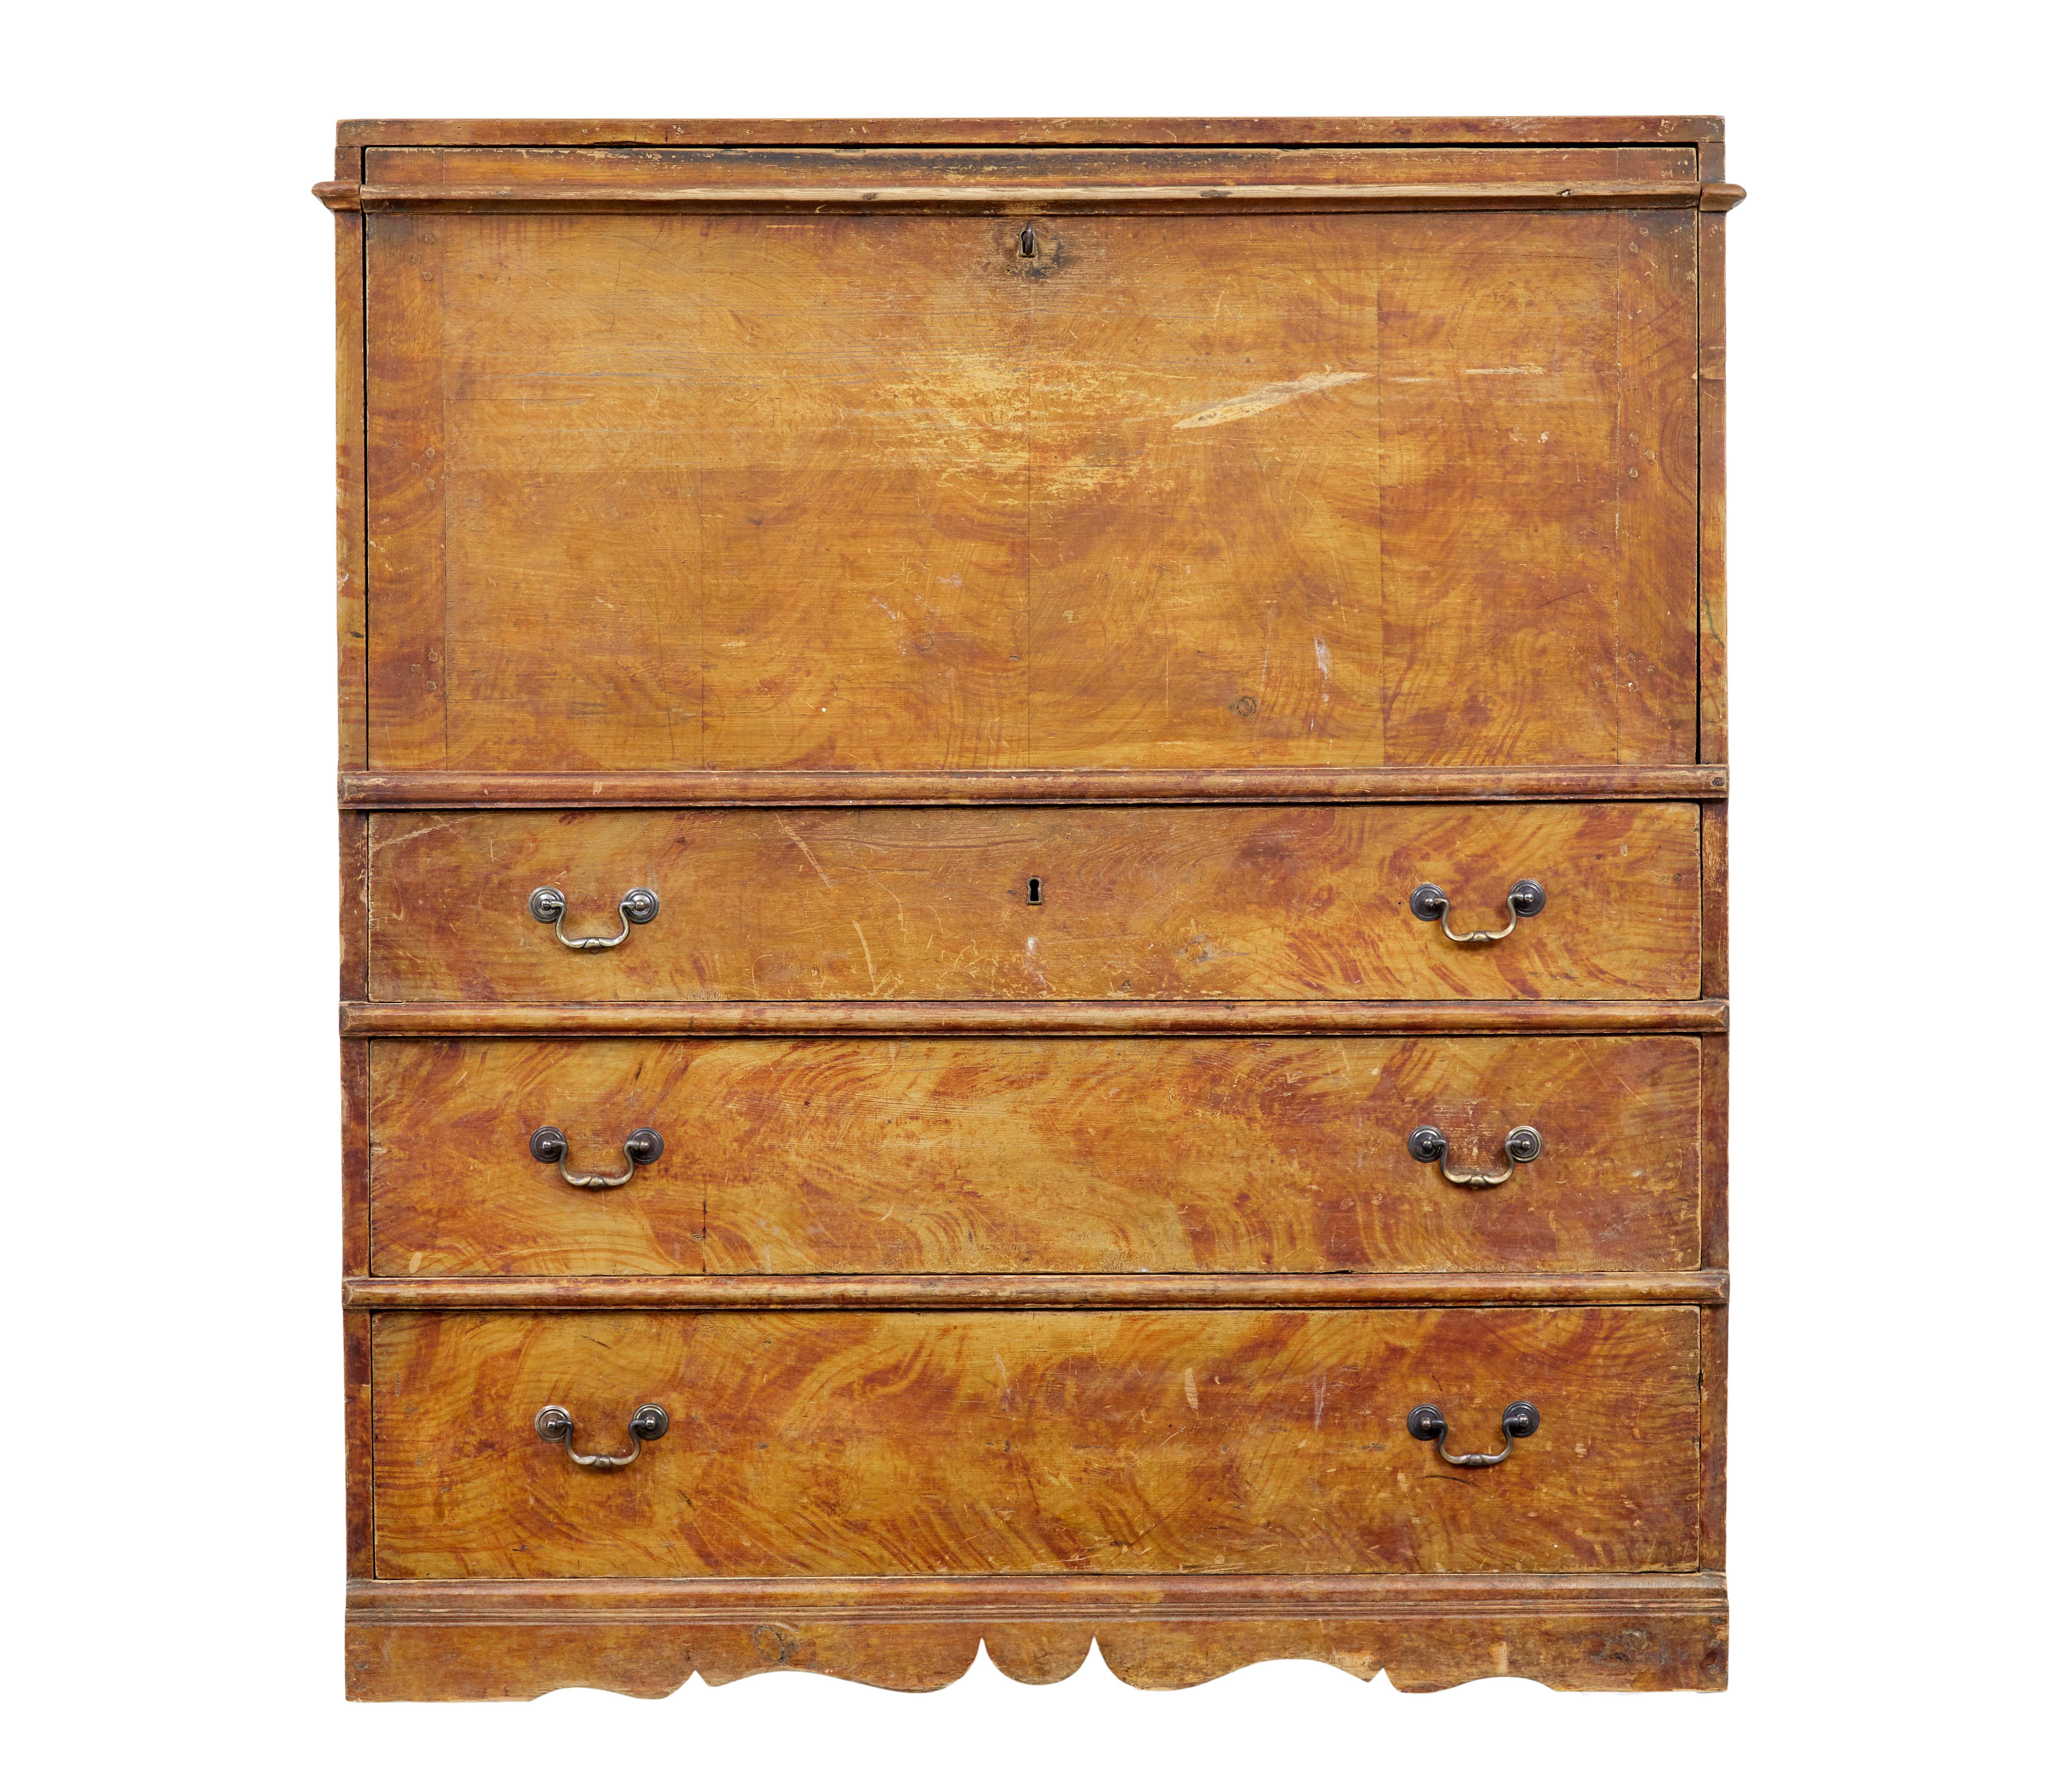 Swedish 19th century painted pine escritoire writing desk circa 1870.

We are pleased to offer this rustic escritoire, made from solid pine and hand painted on the outside using a rag work technique, which simulates grain.

Front with drop down